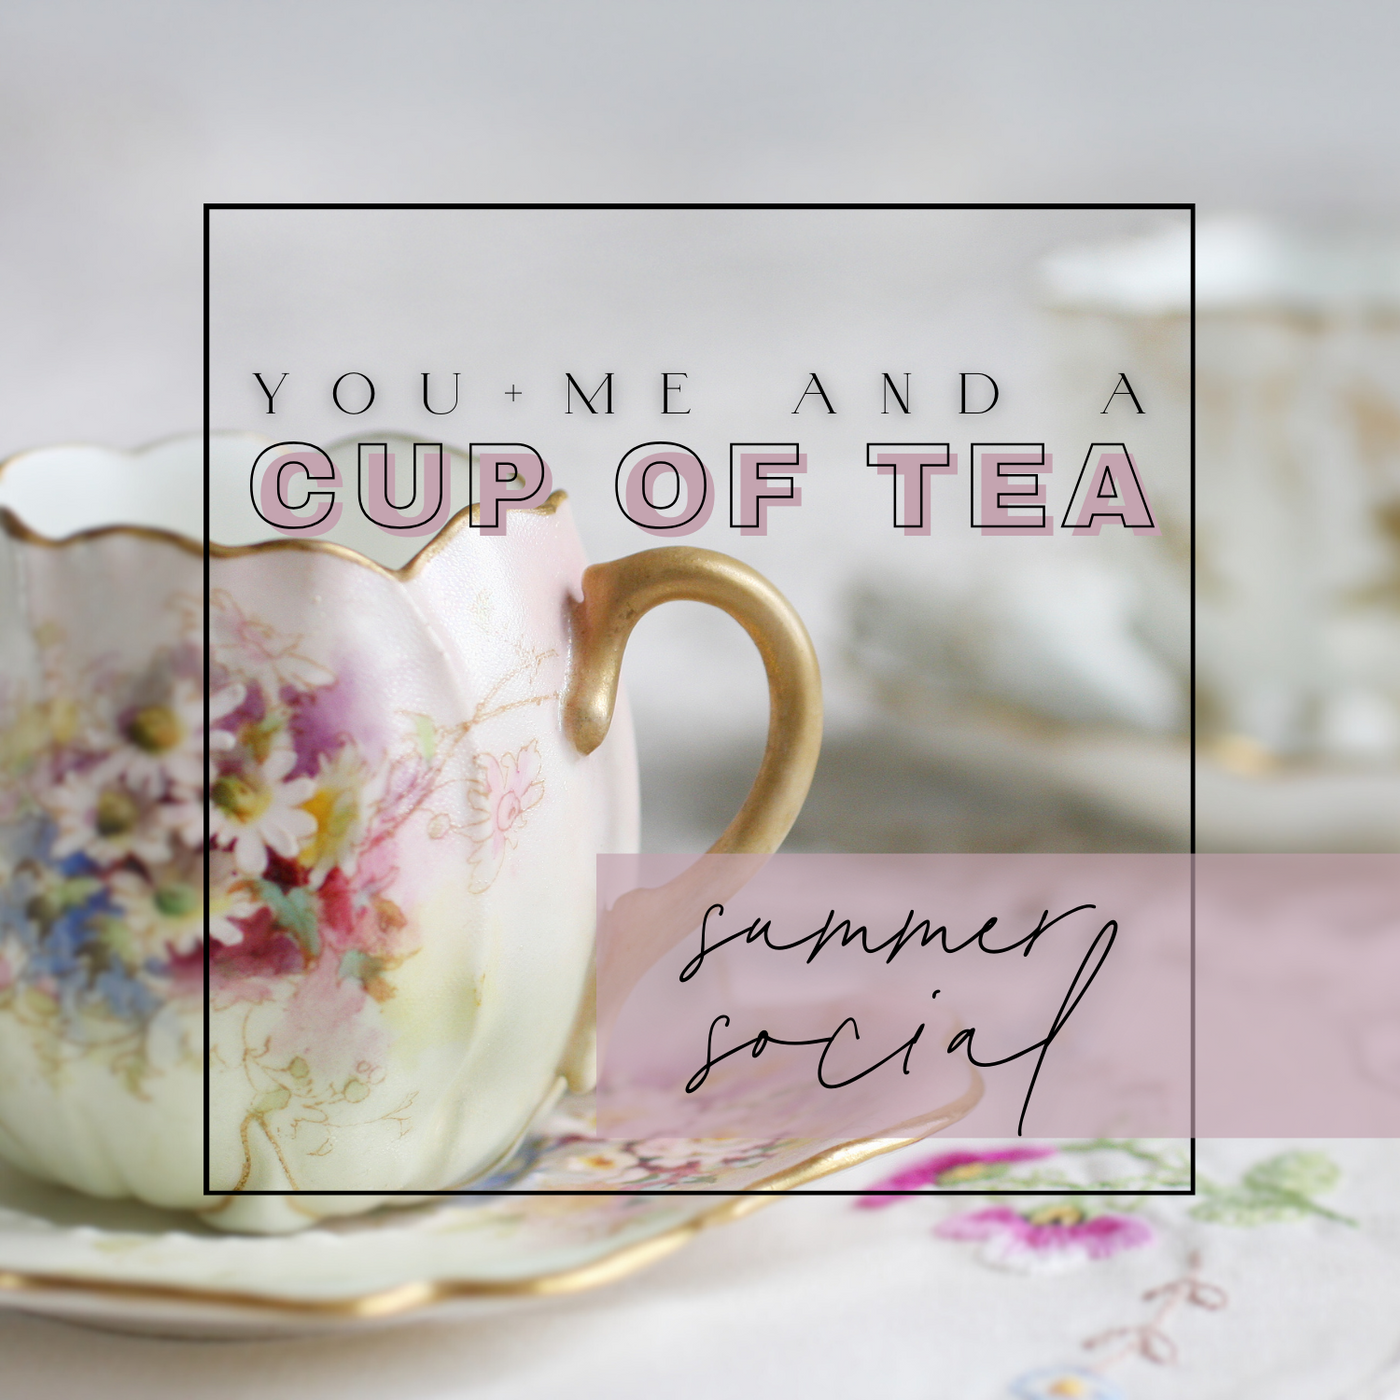 You, Me, and a Cup of Tea - Summer Social